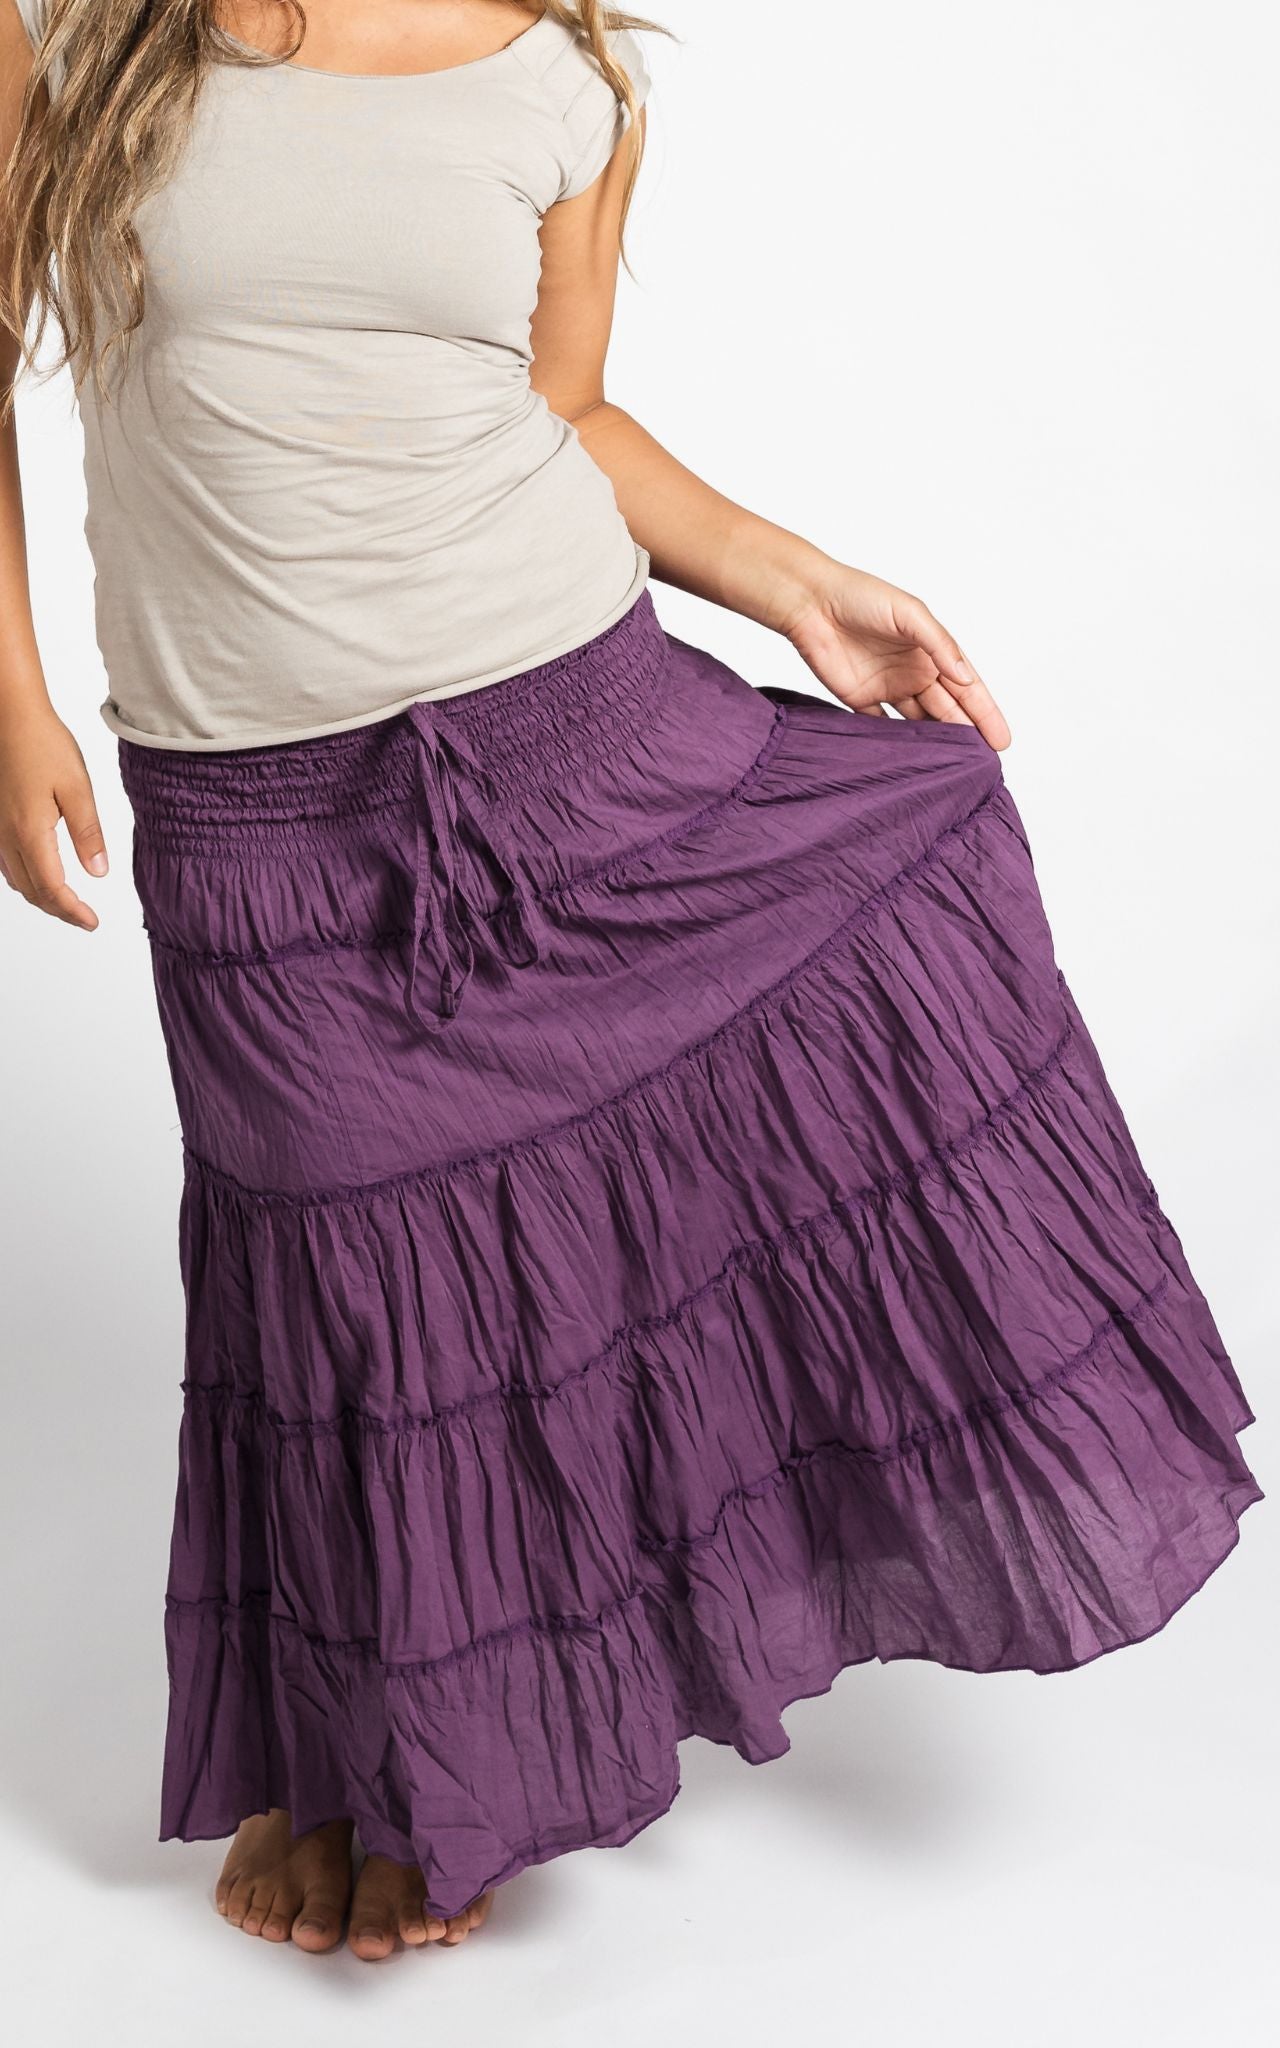 Surya Australia Ethical Cotton 'Franit' Skirt made in Nepal - Lilac